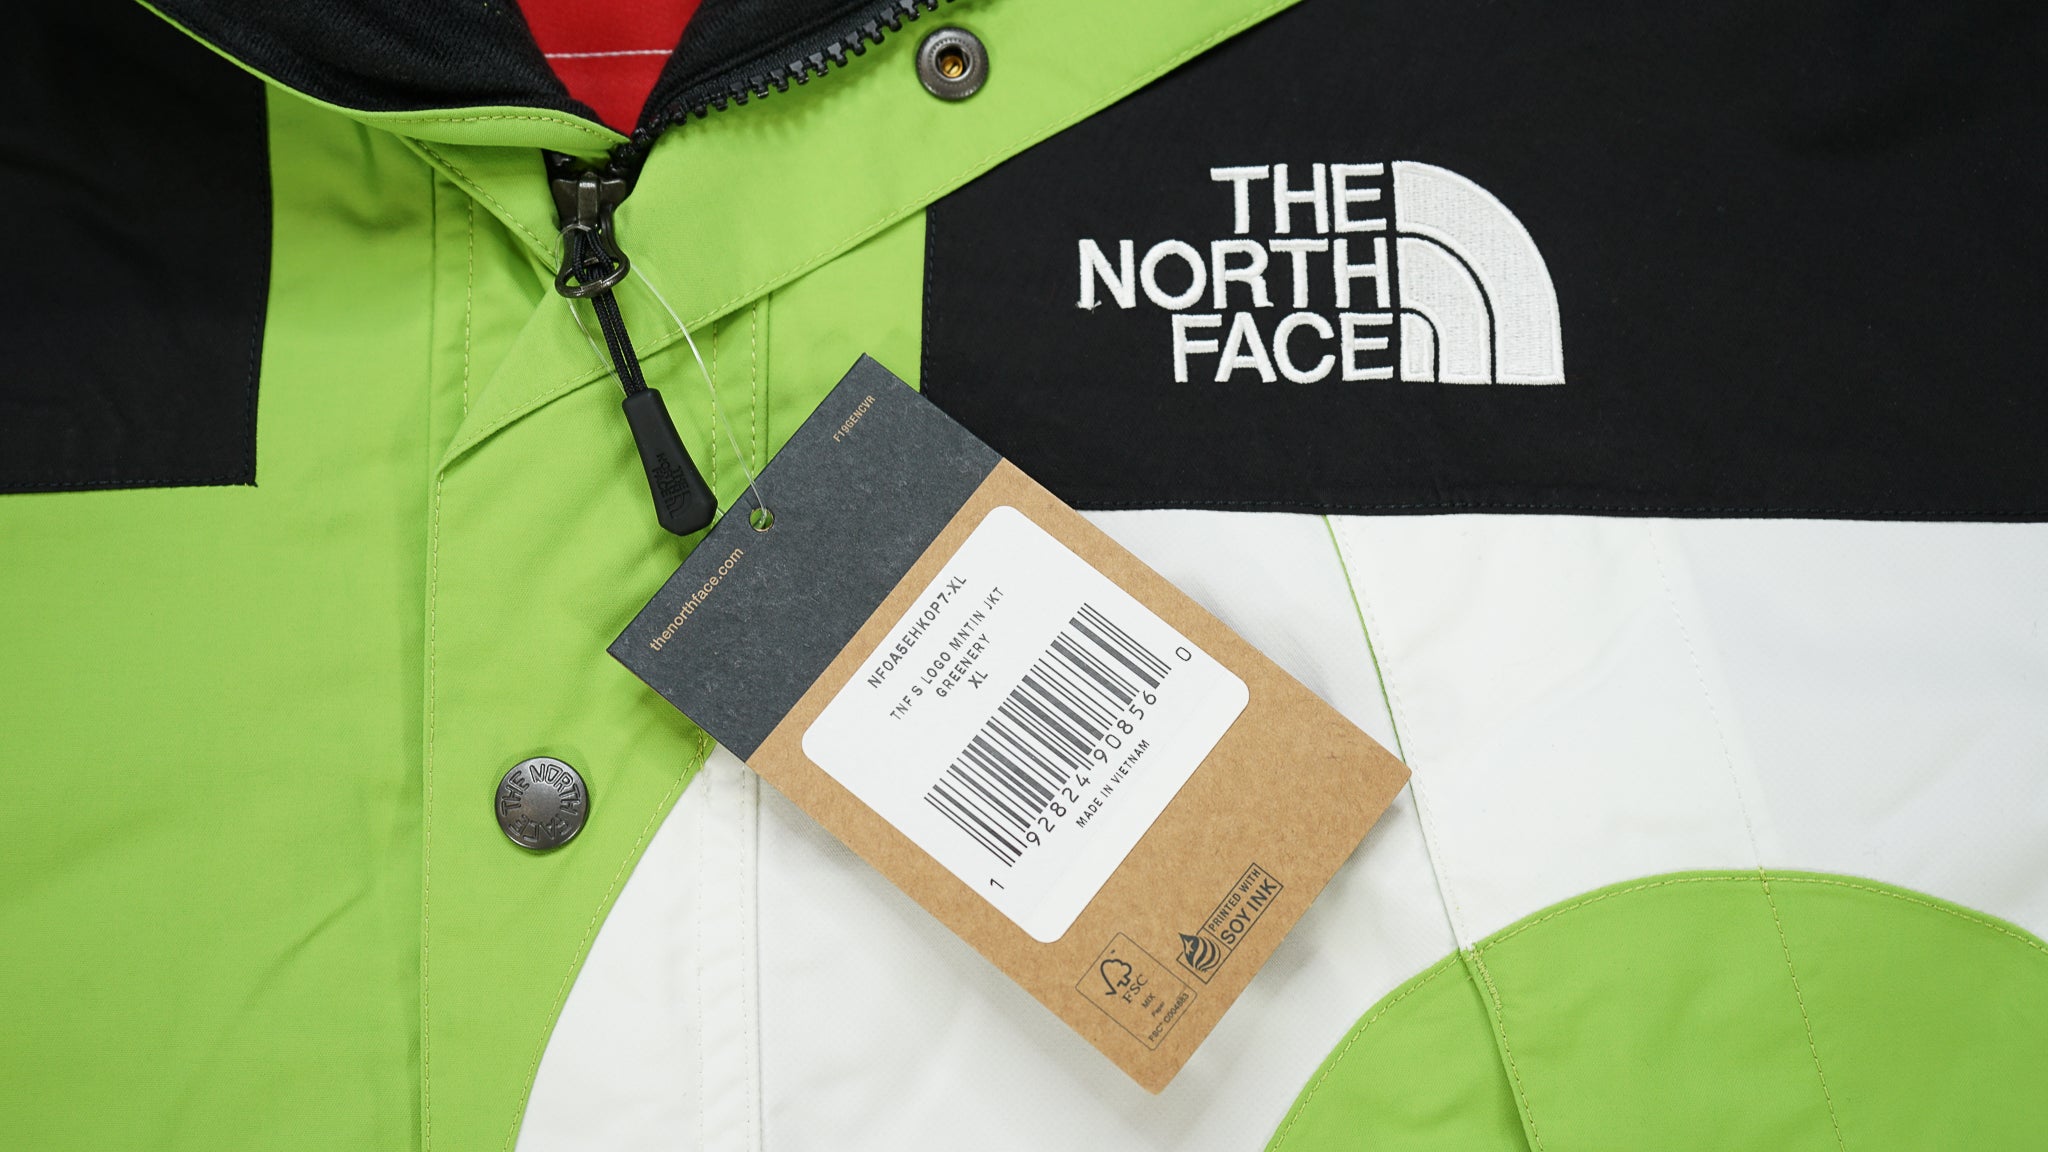 Supreme x The North Face S Logo Mountain Jacket 'Black' for Sale